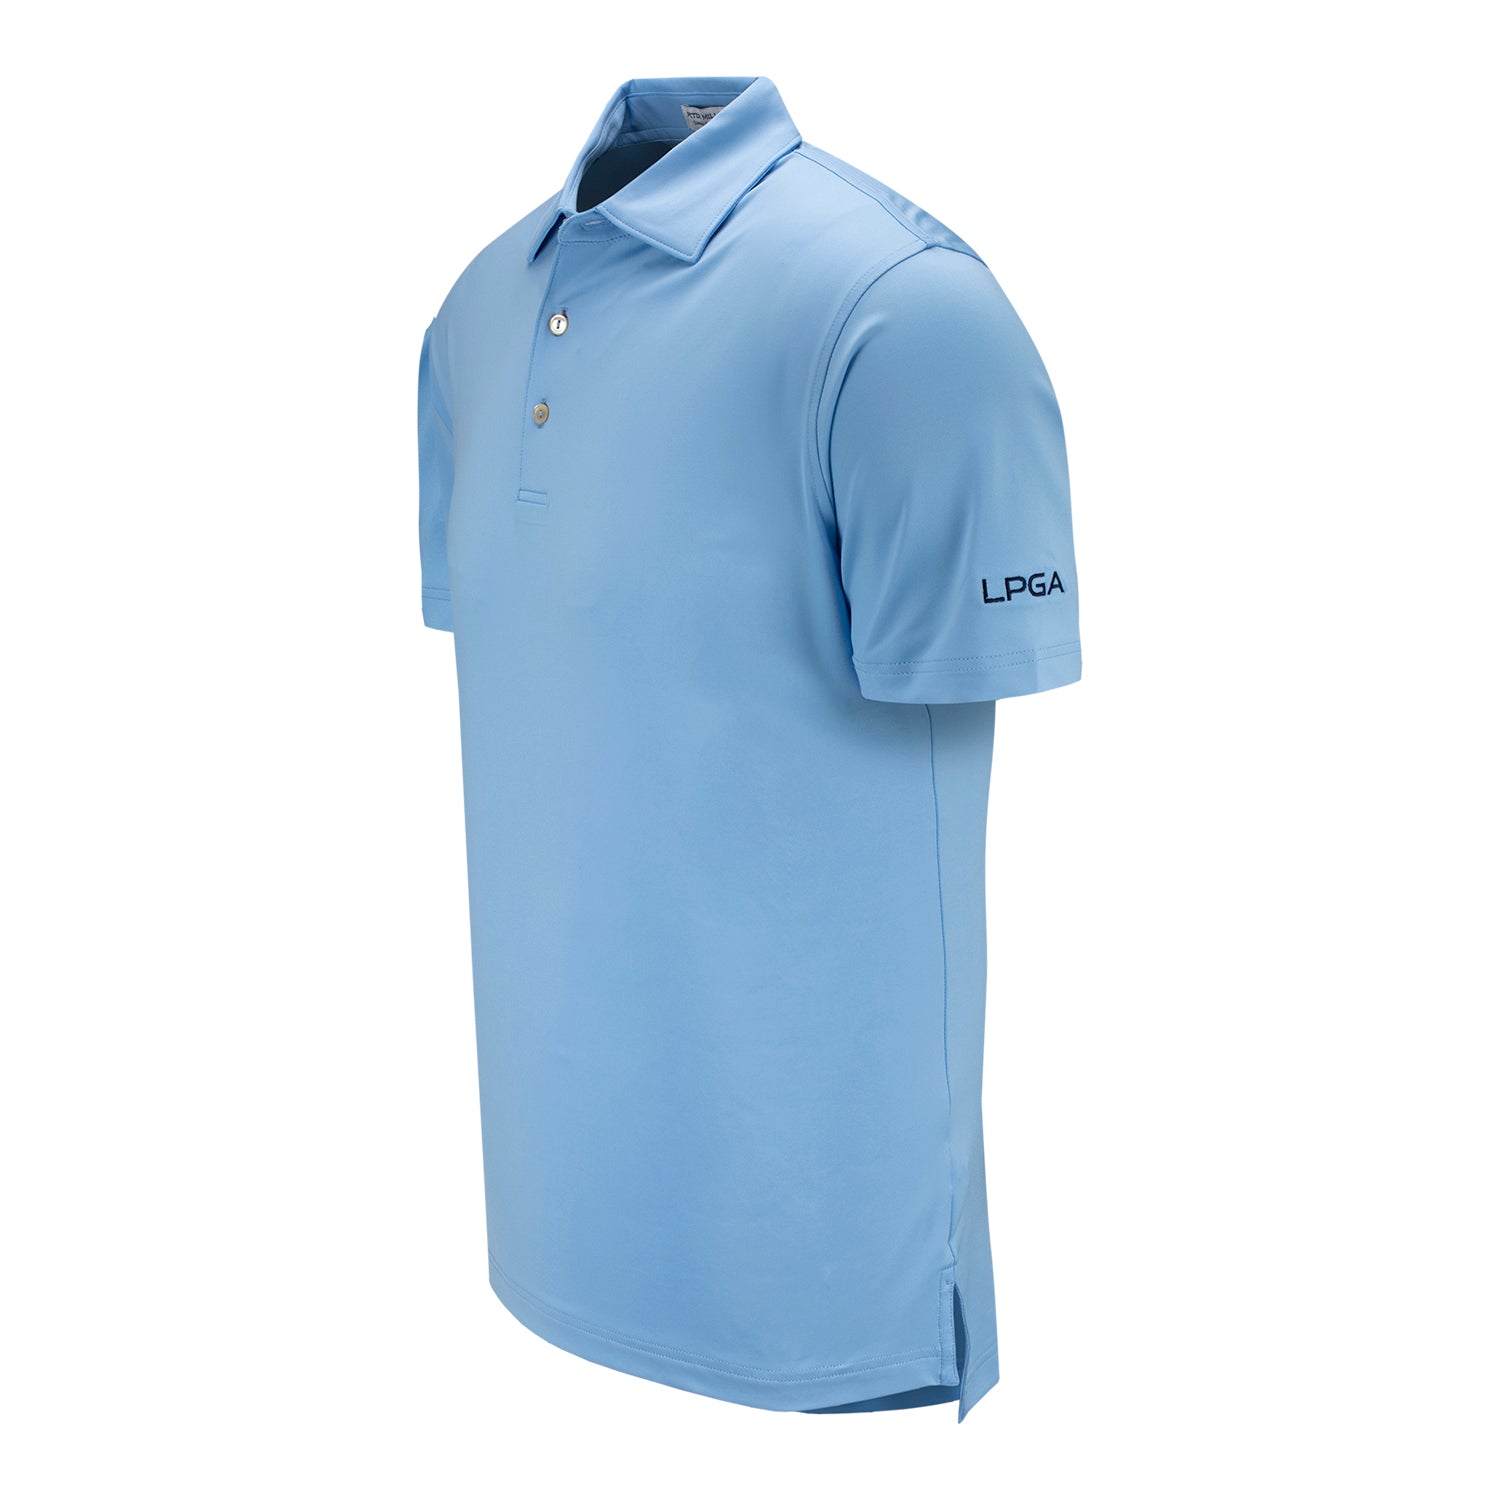 Peter Millar 2023 LPGA Men's Solid Jersey Polo - Angled Left Side View